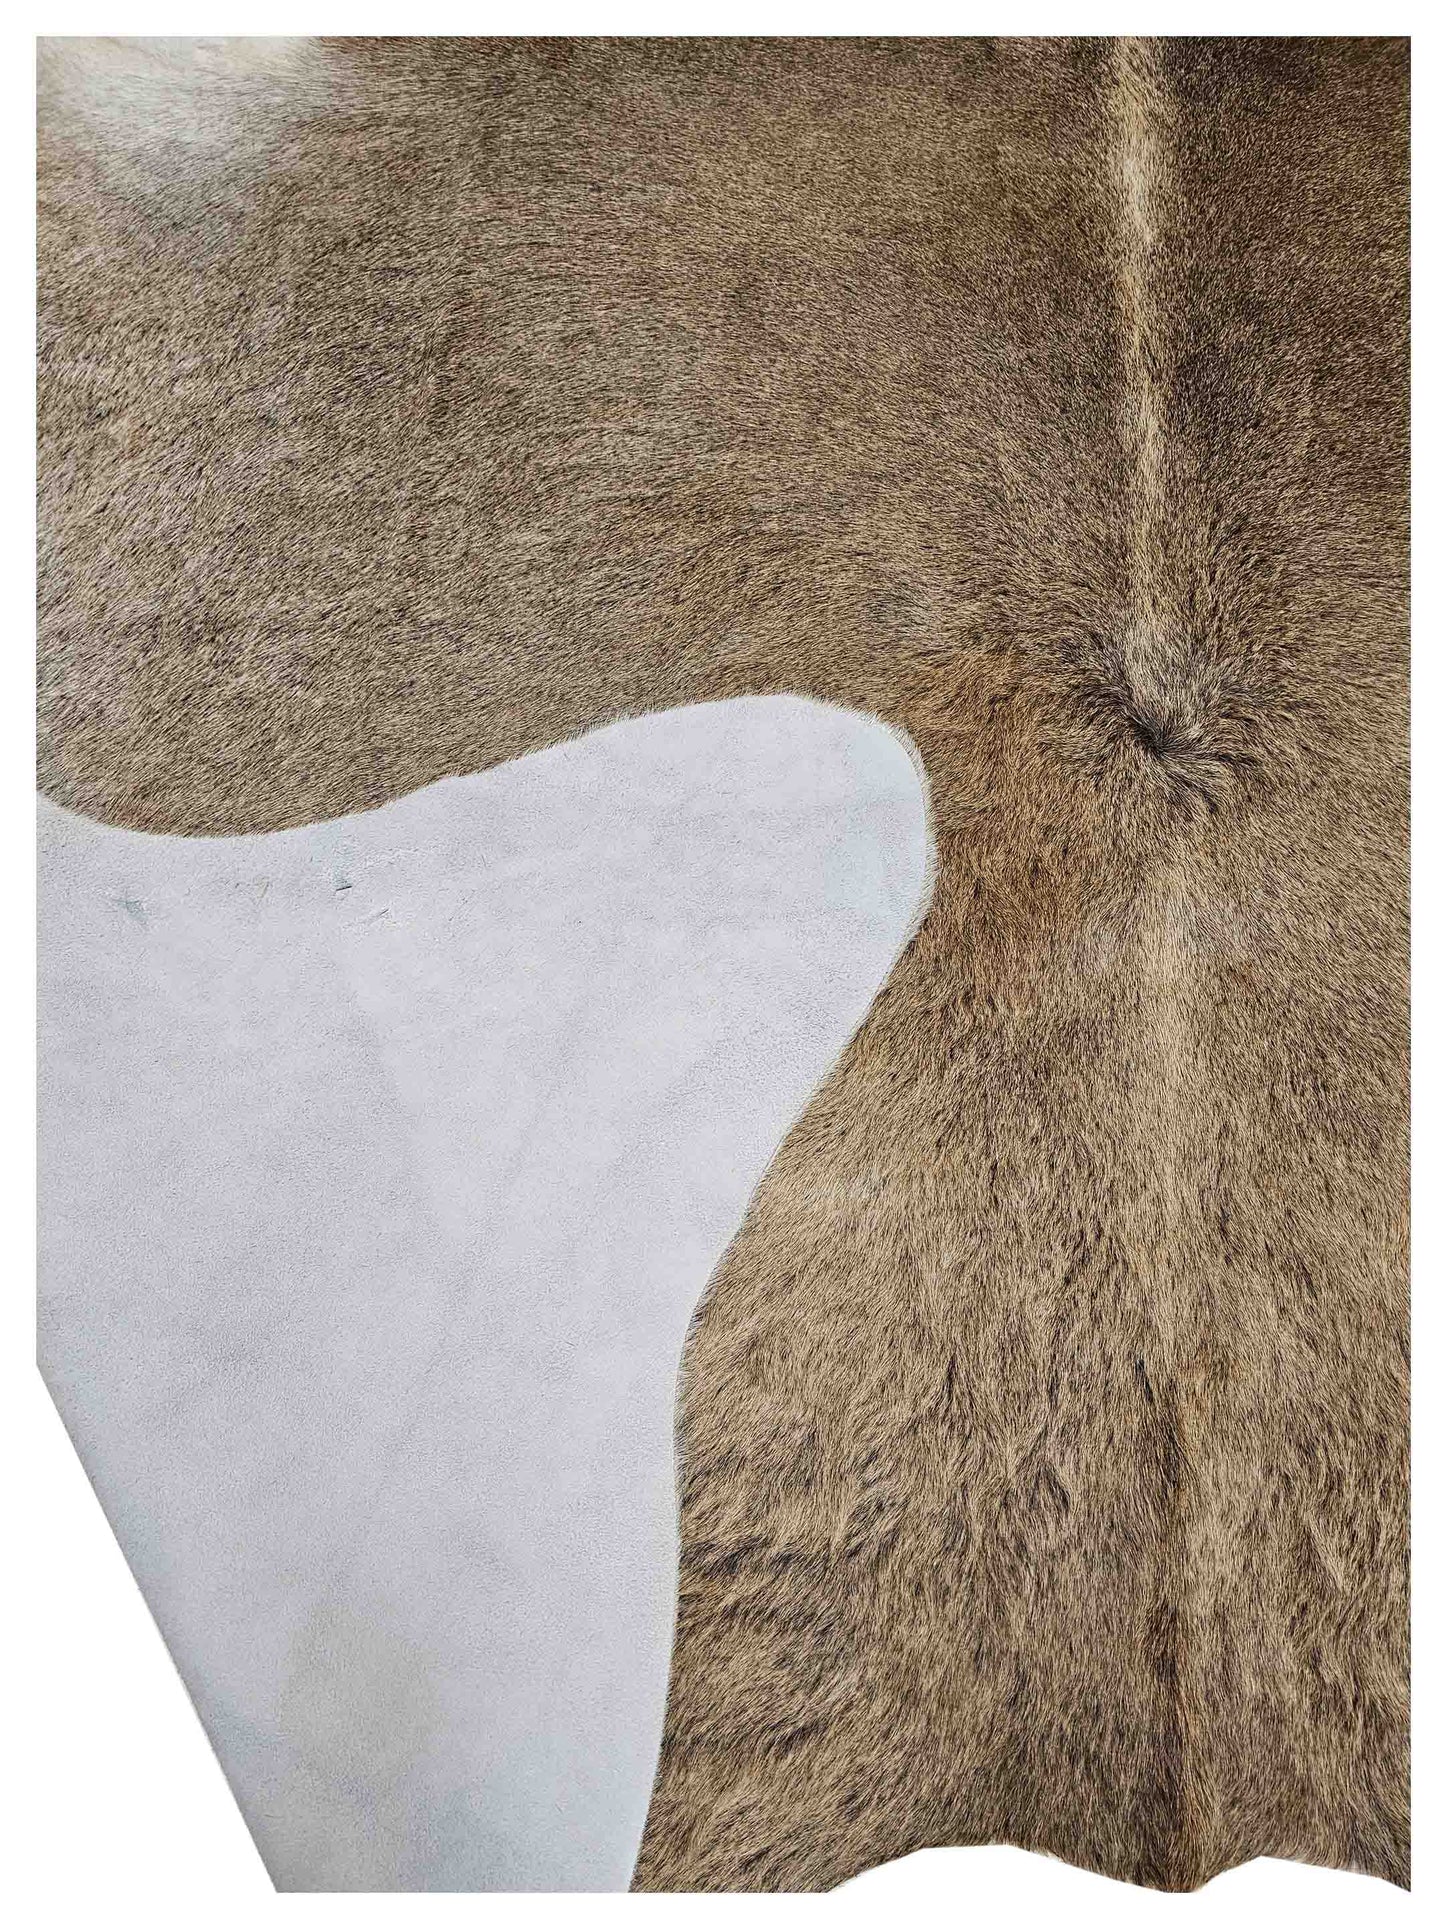 Artisan Claire  Champagne  Hair on Hide Crafted Rug